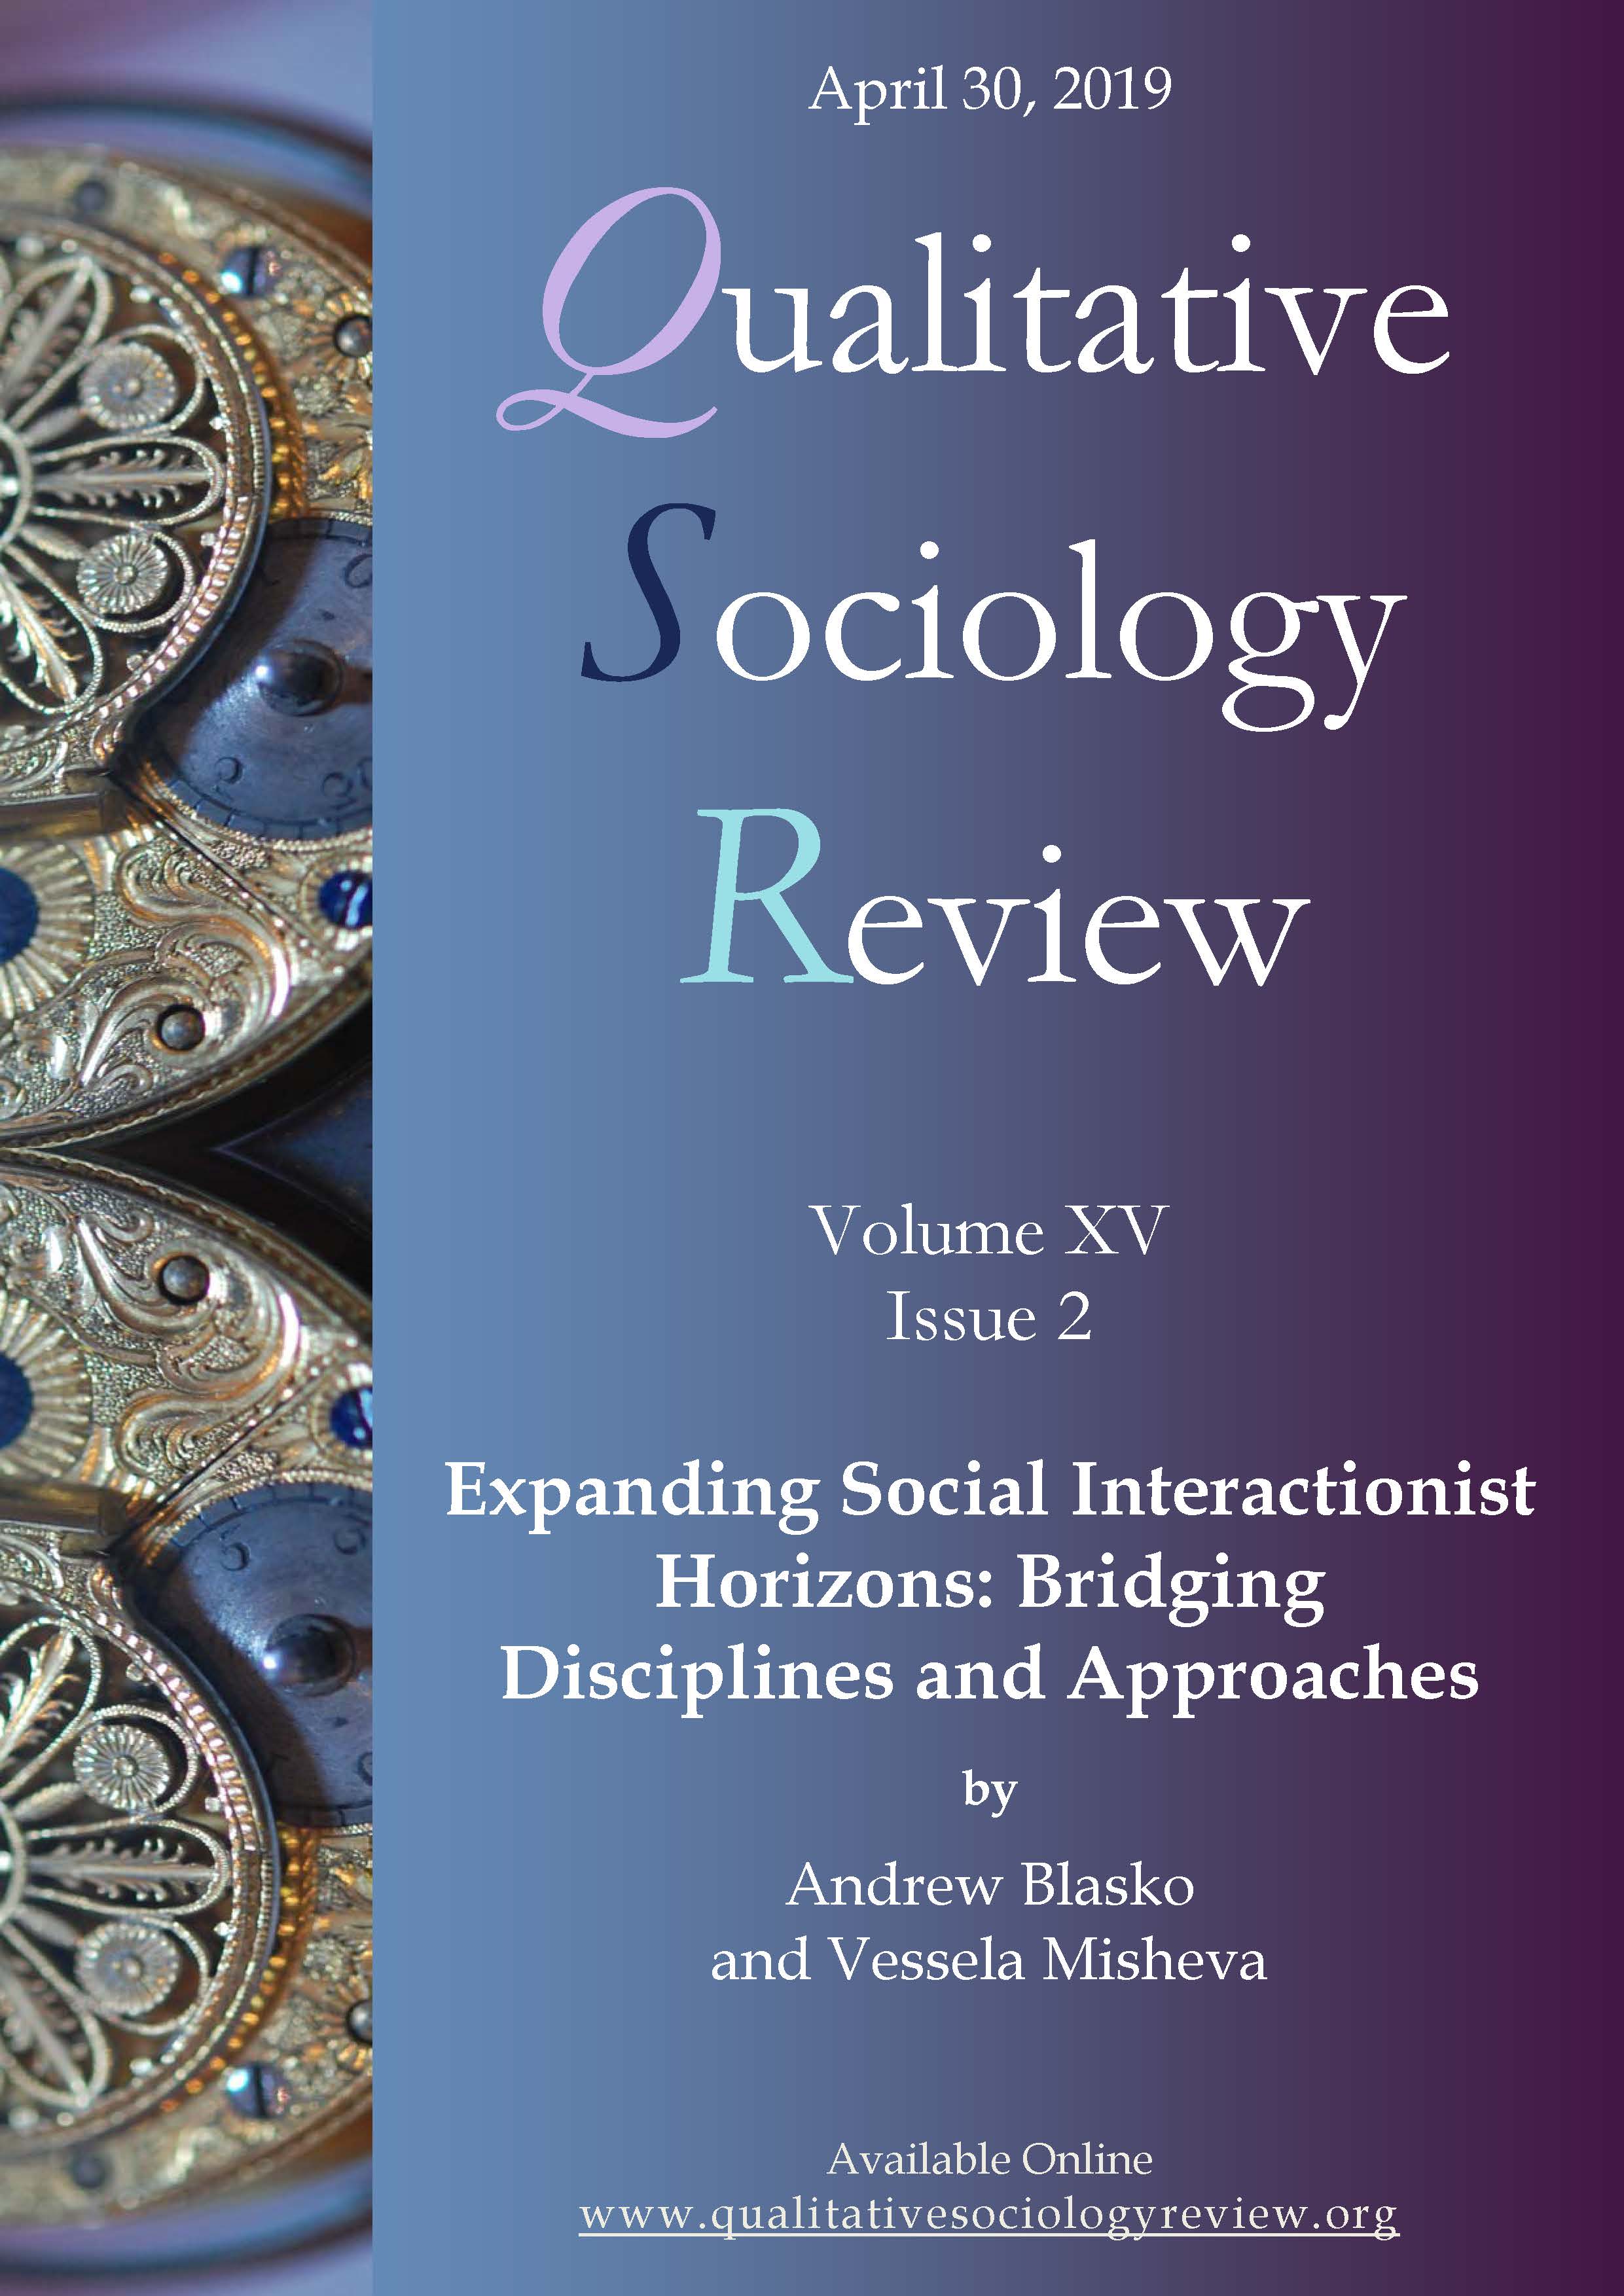 Introduction to the Special Issue. "Expanding Social Interactionist Horizons: Bridging Disciplines and Approaches" Cover Image